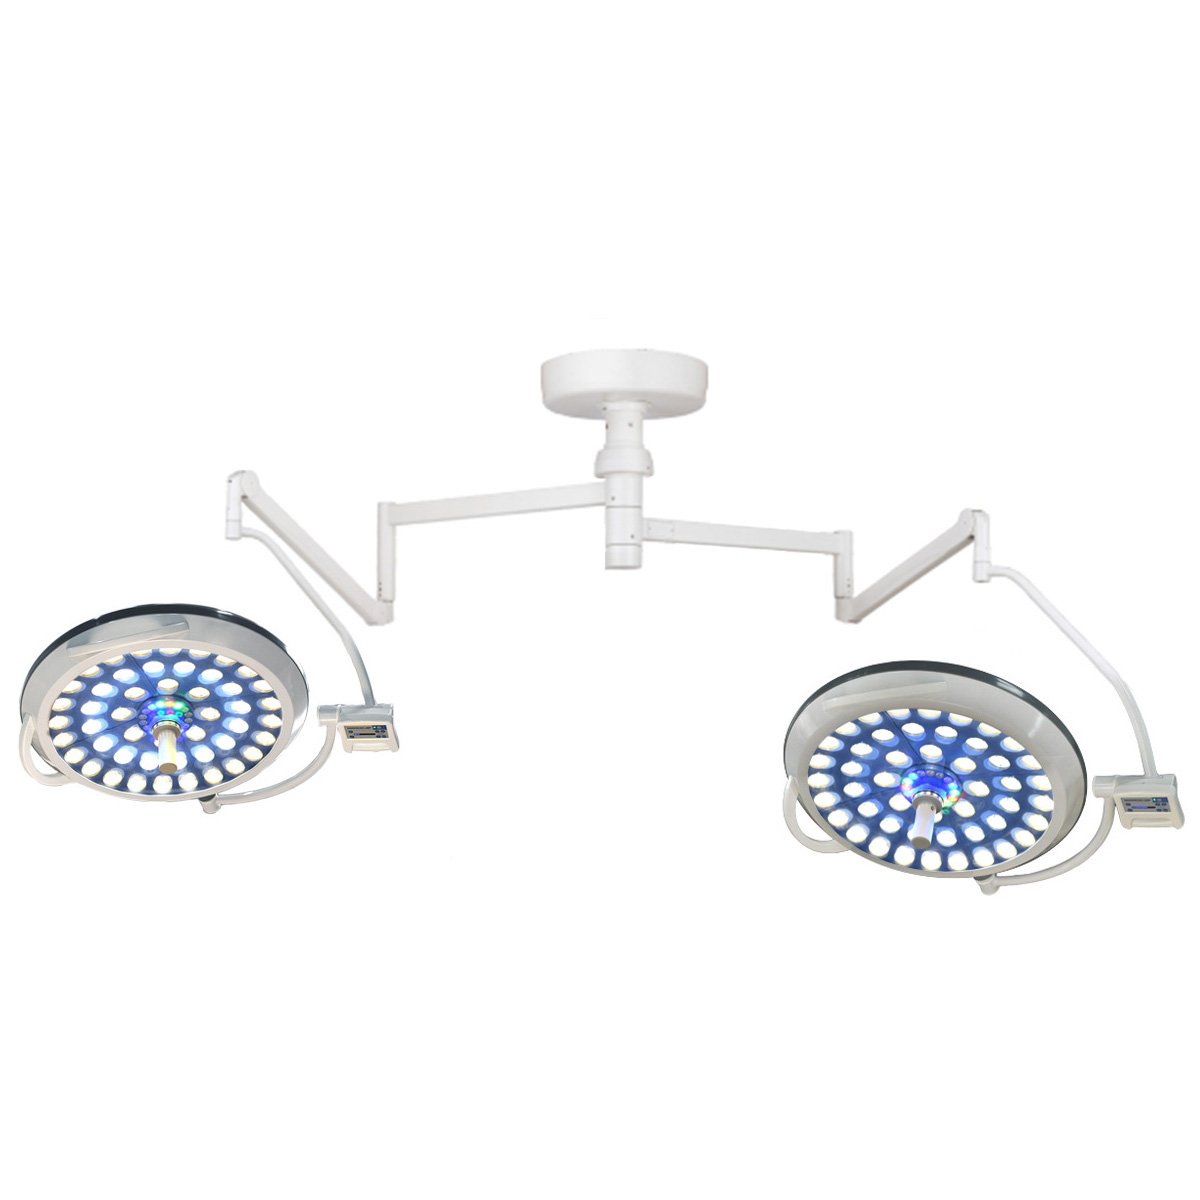 MICARE E700/700(Cree) Ceiling Double Dome LED Surgical Light